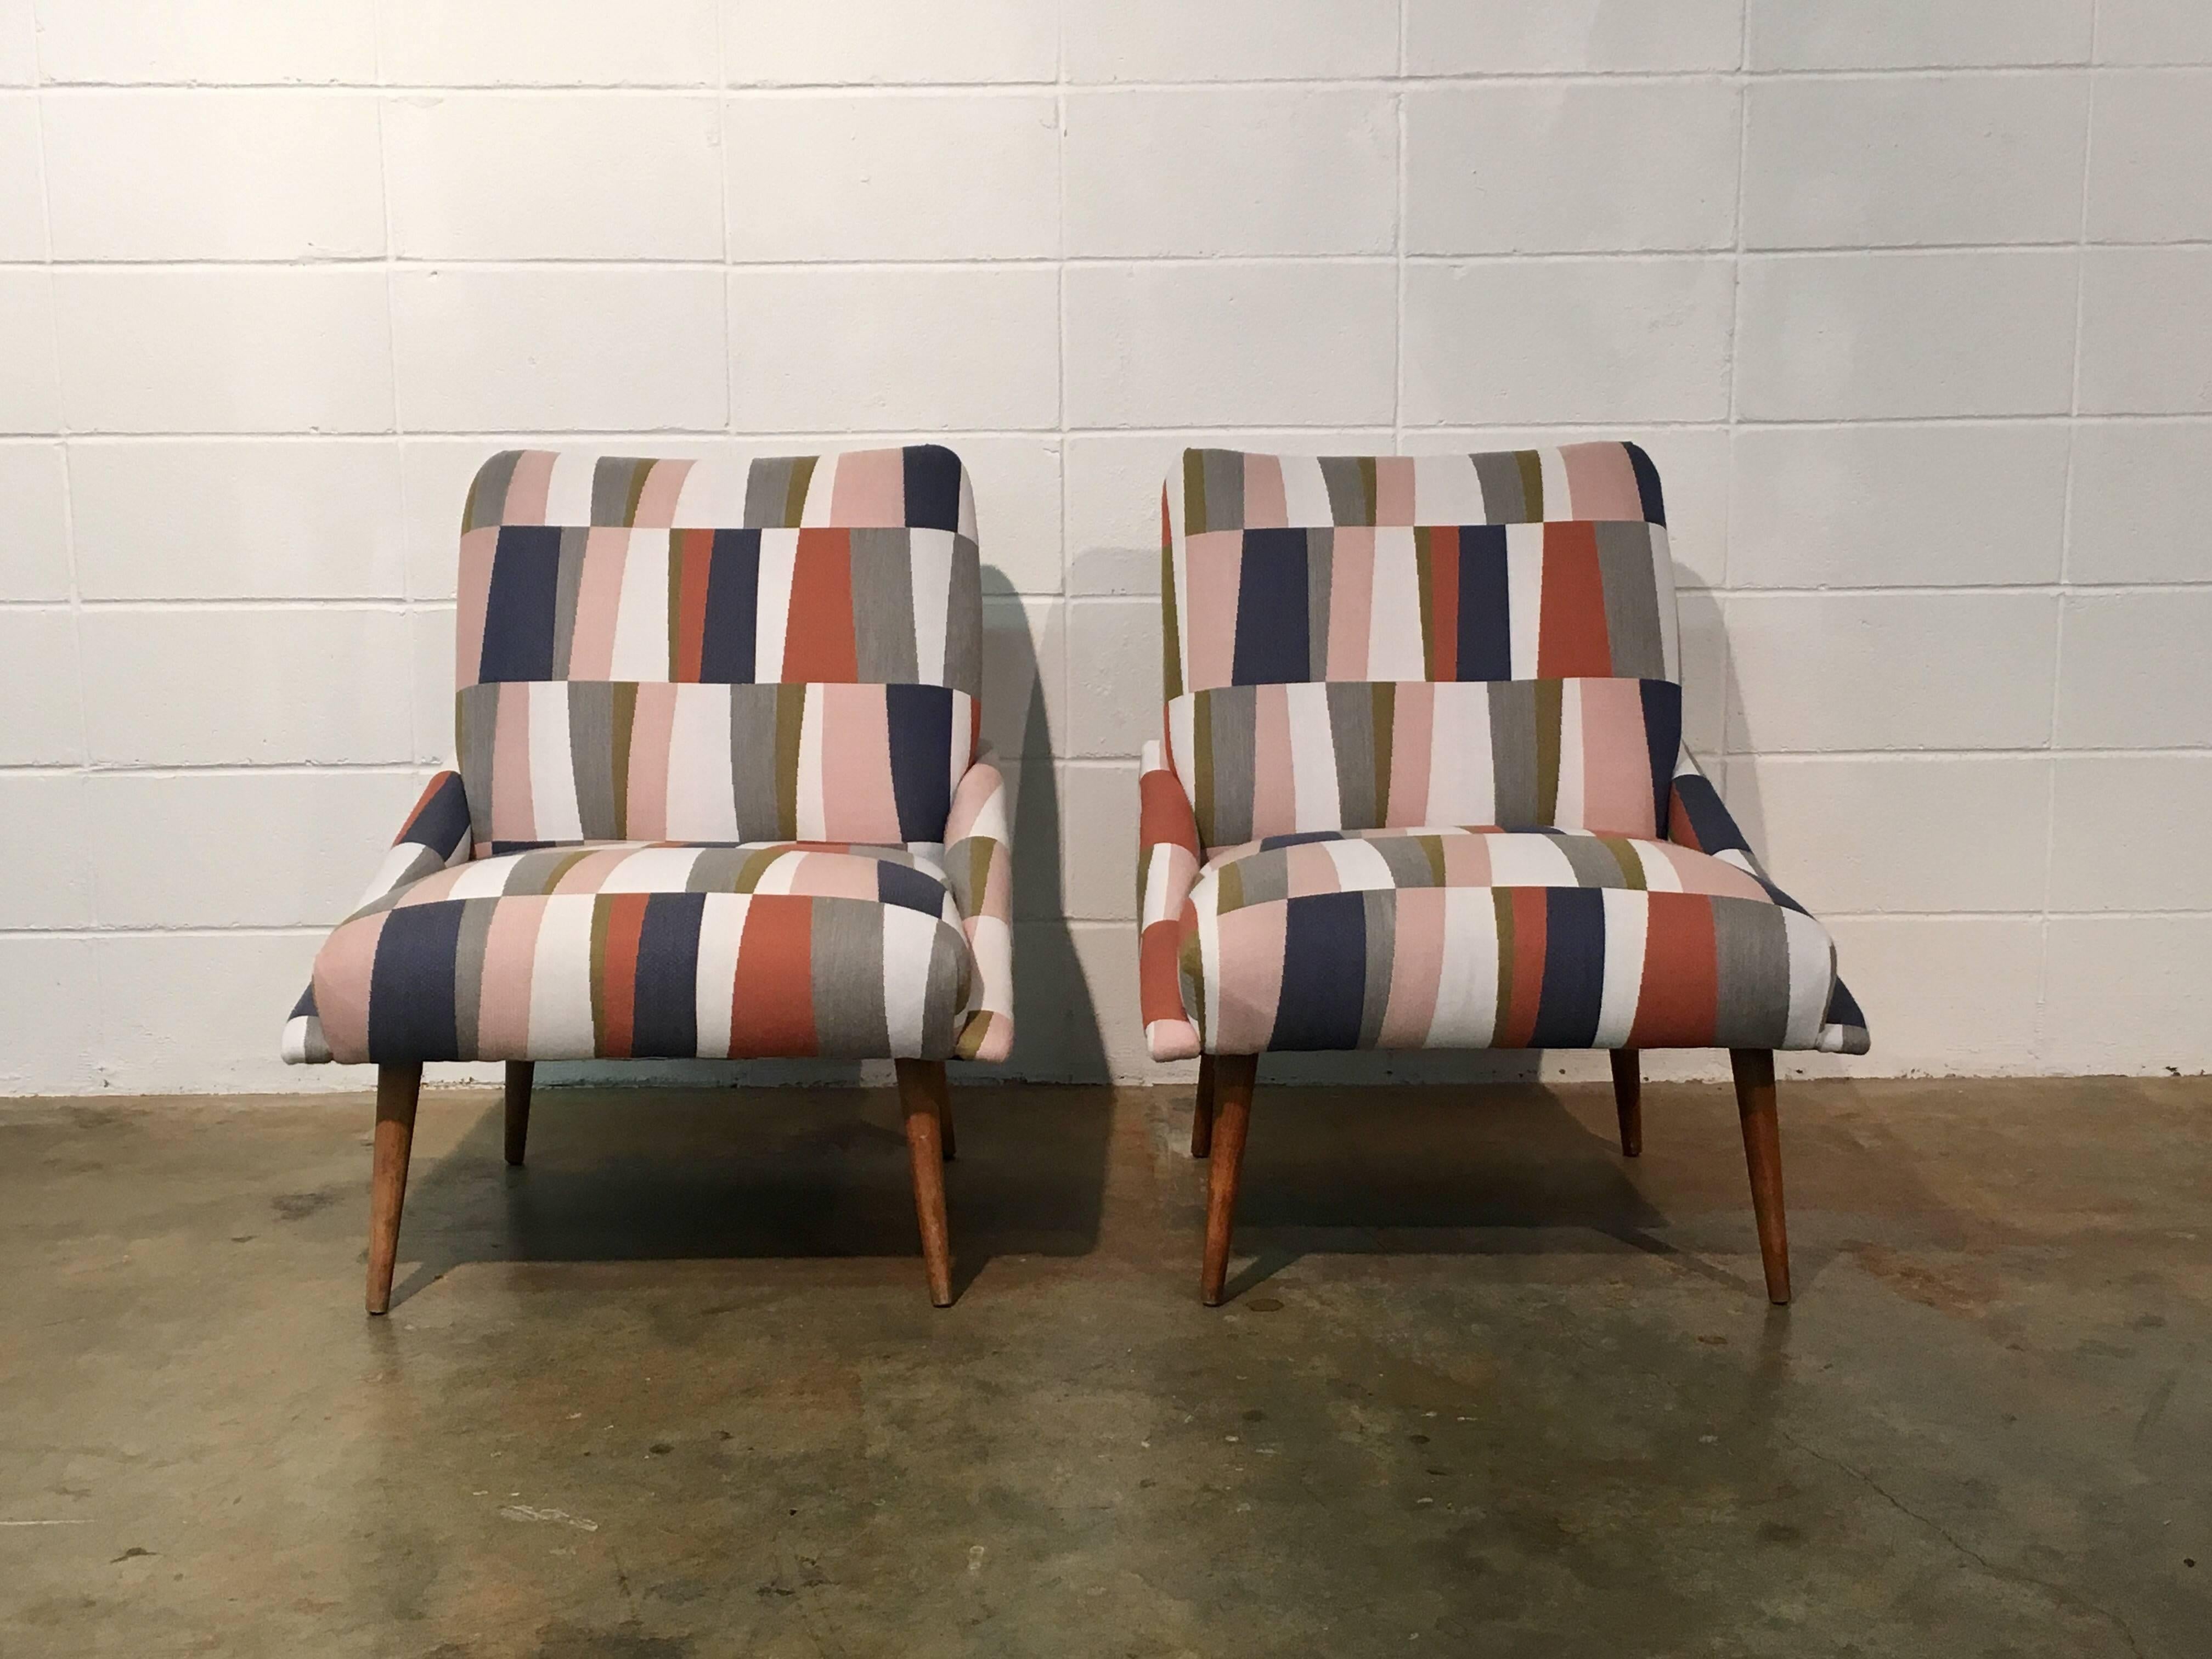 Mid-Century Modern slipper chairs restored, including new foam and upholstery. Geometric fabric in cool colors resting on sleek wood taper legs. Restored, no known issues.